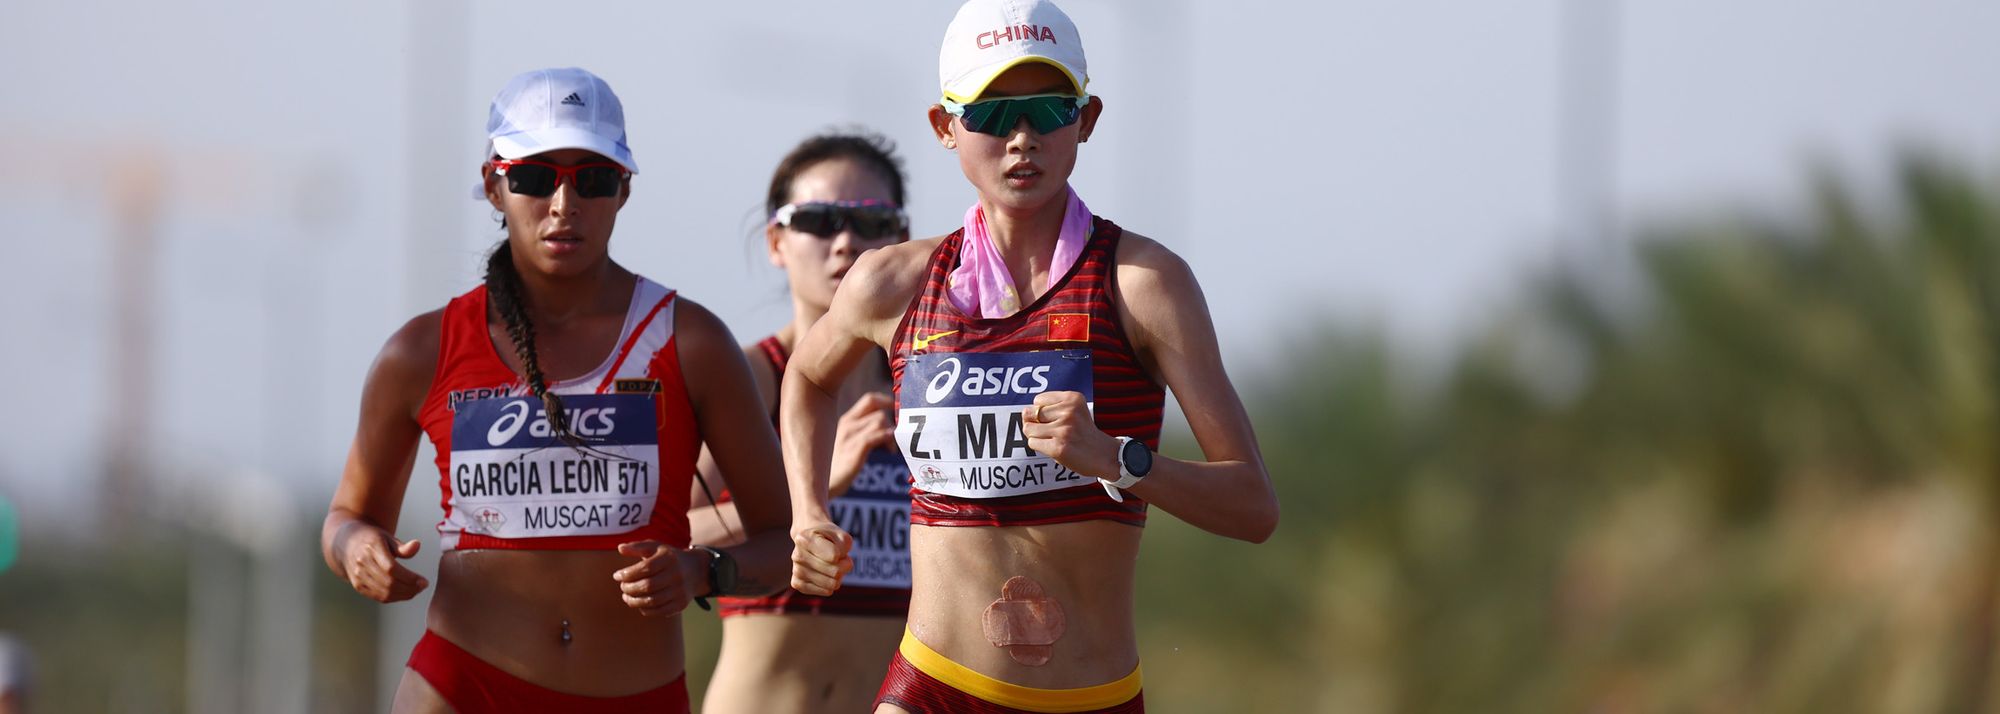 A look at the leading contenders in the senior women's 20km at the World Athletics Race Walking Team Championships Antalya 24